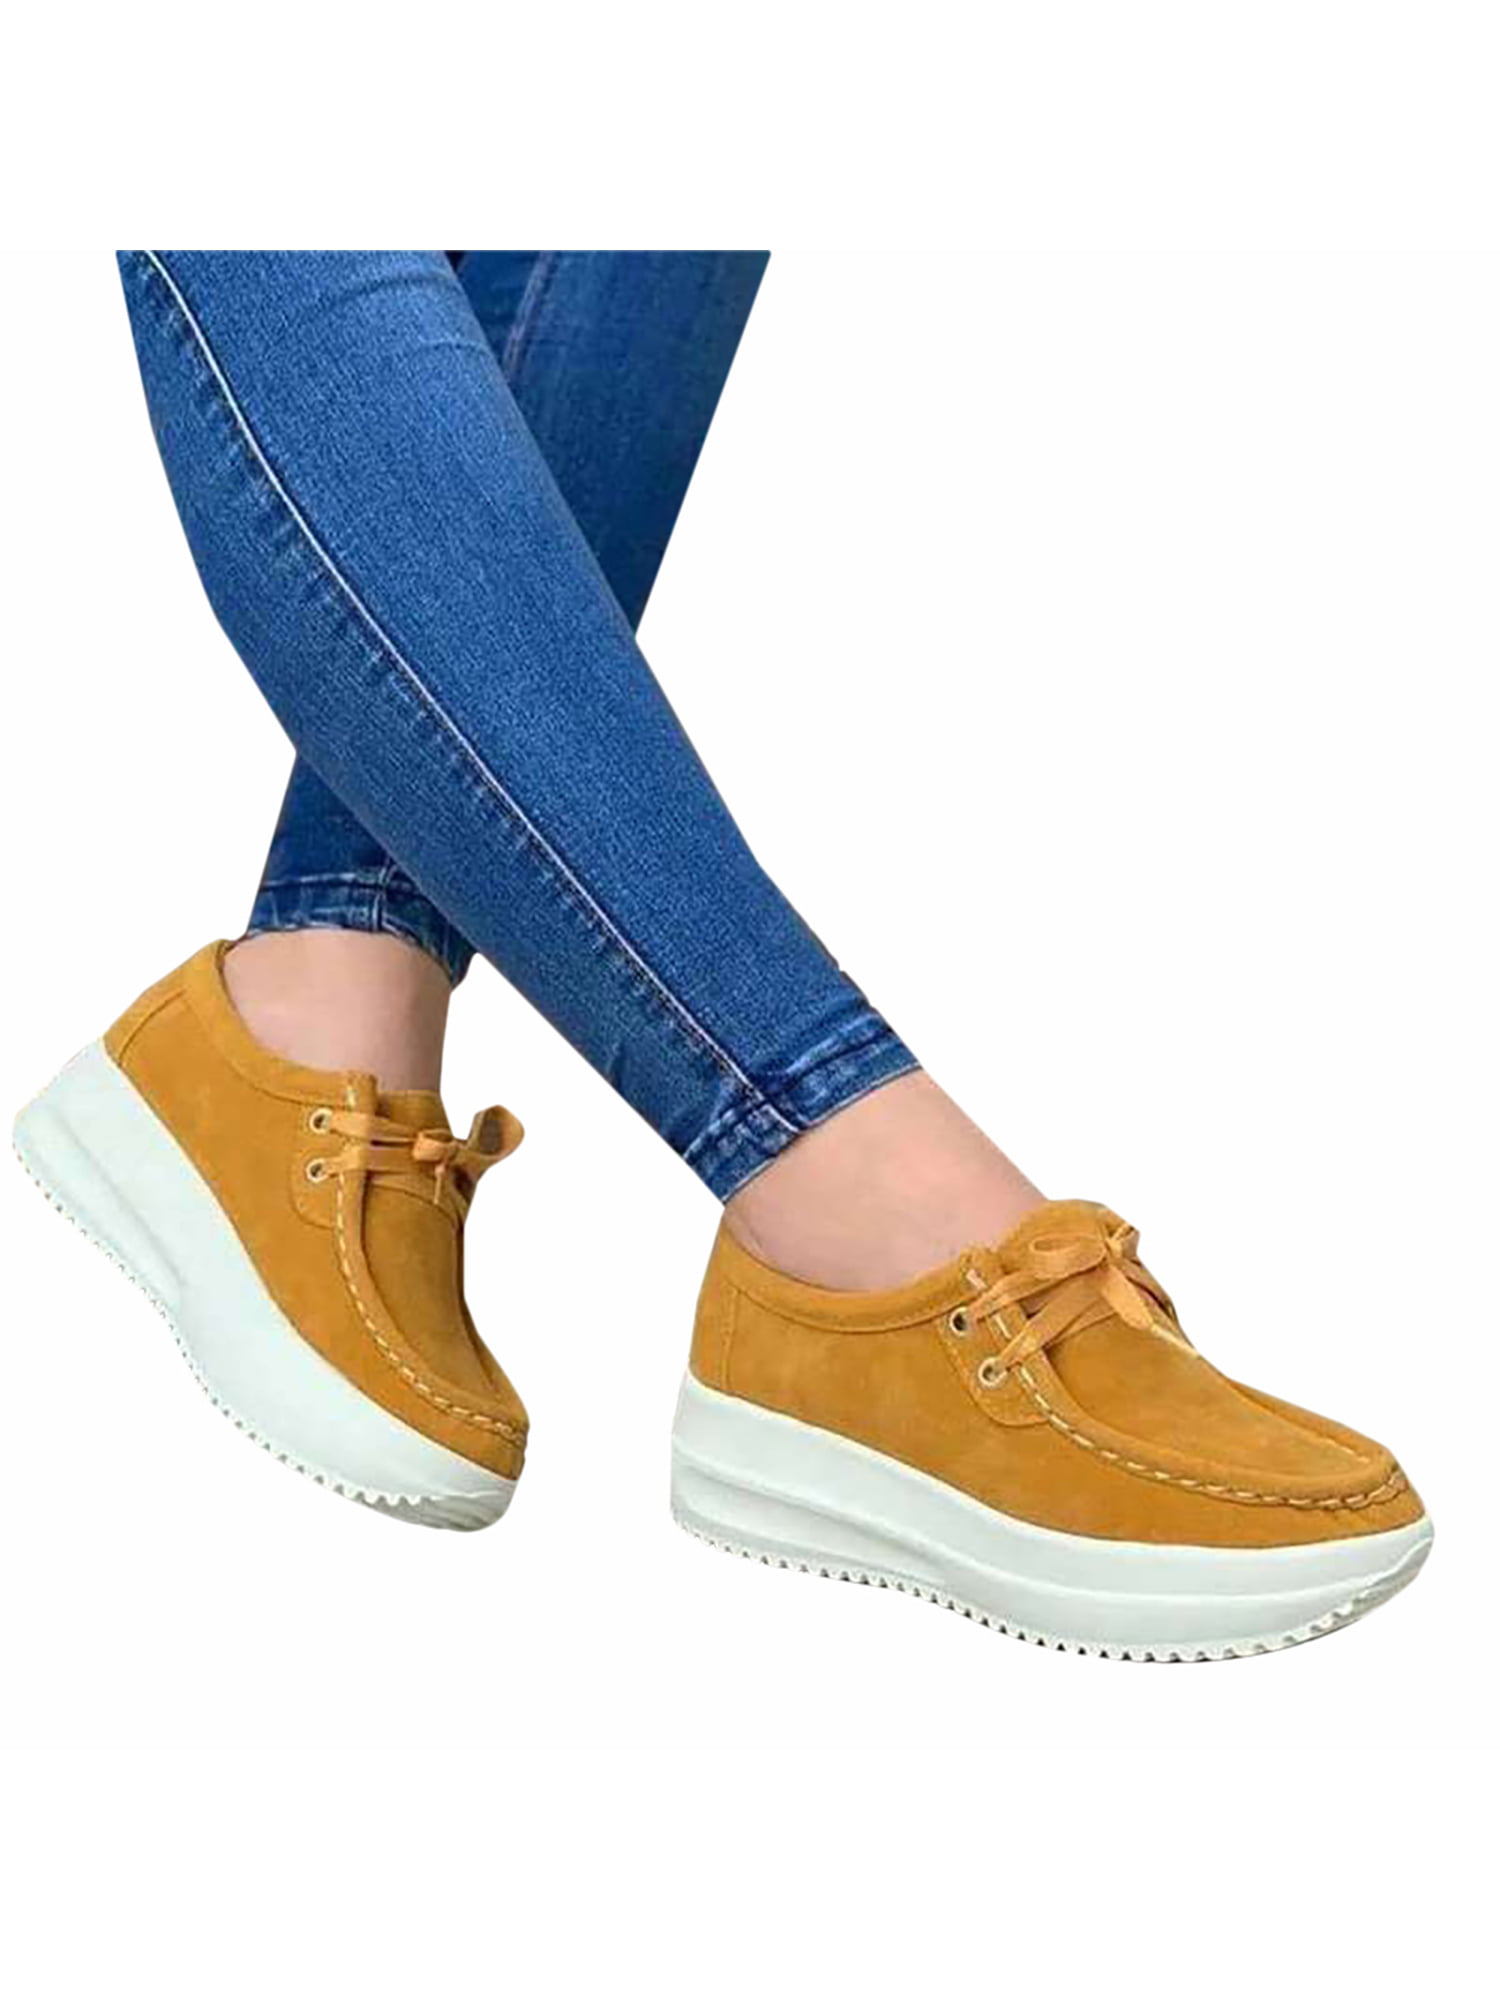 Womens Sports Shoes Platform Wedge Lace Up Jogging Jogger Athletic Sneakers Size